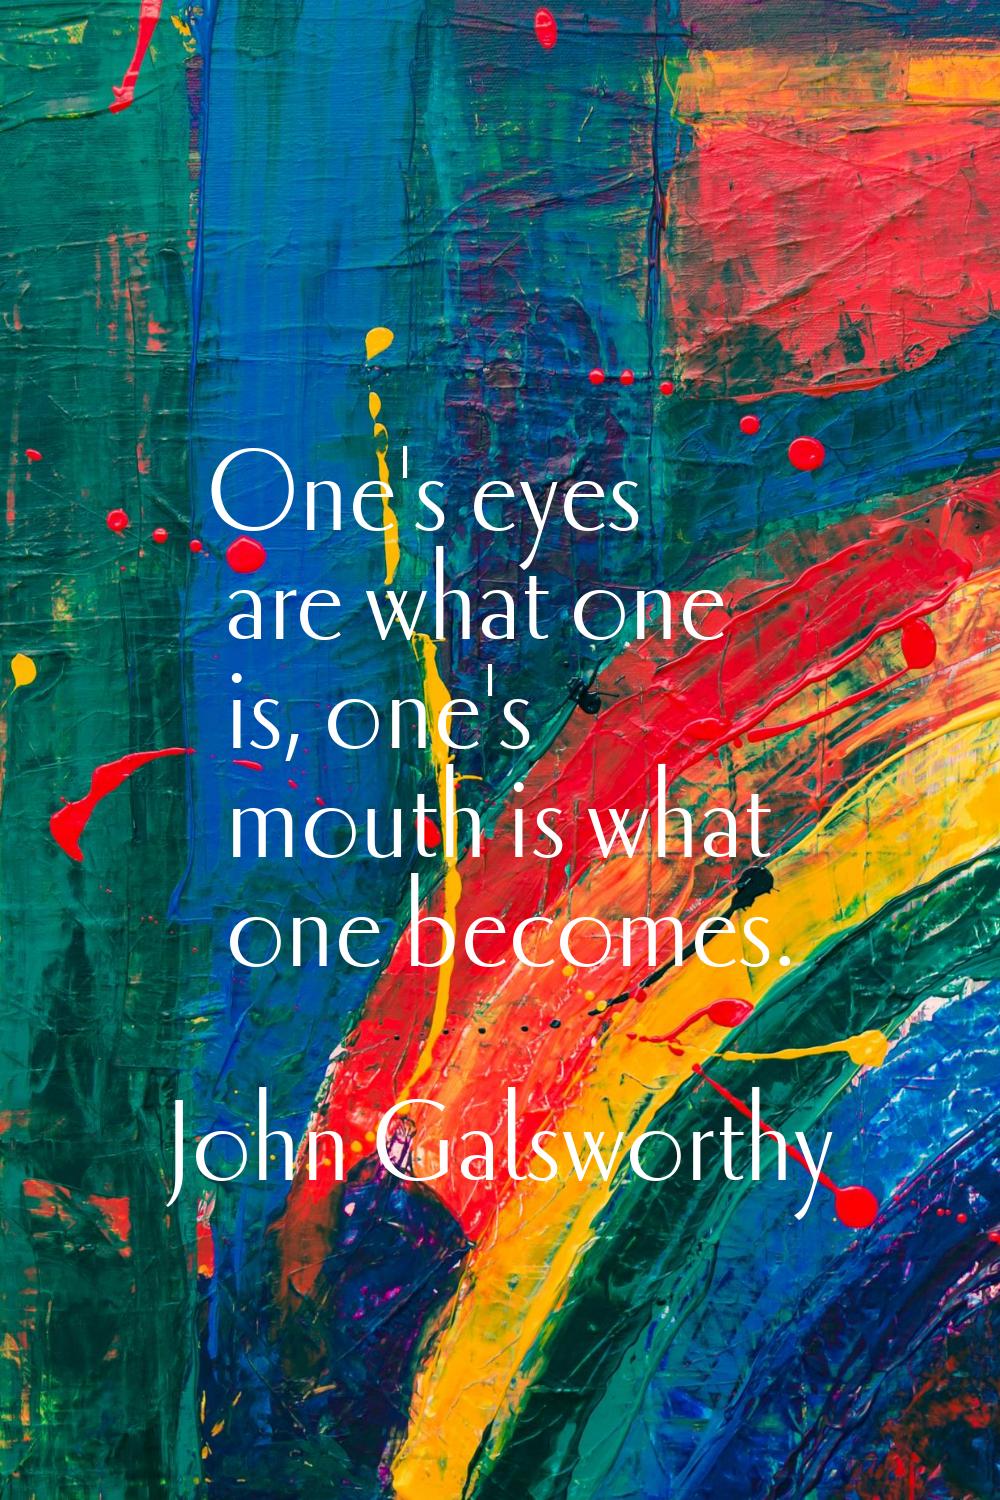 One's eyes are what one is, one's mouth is what one becomes.